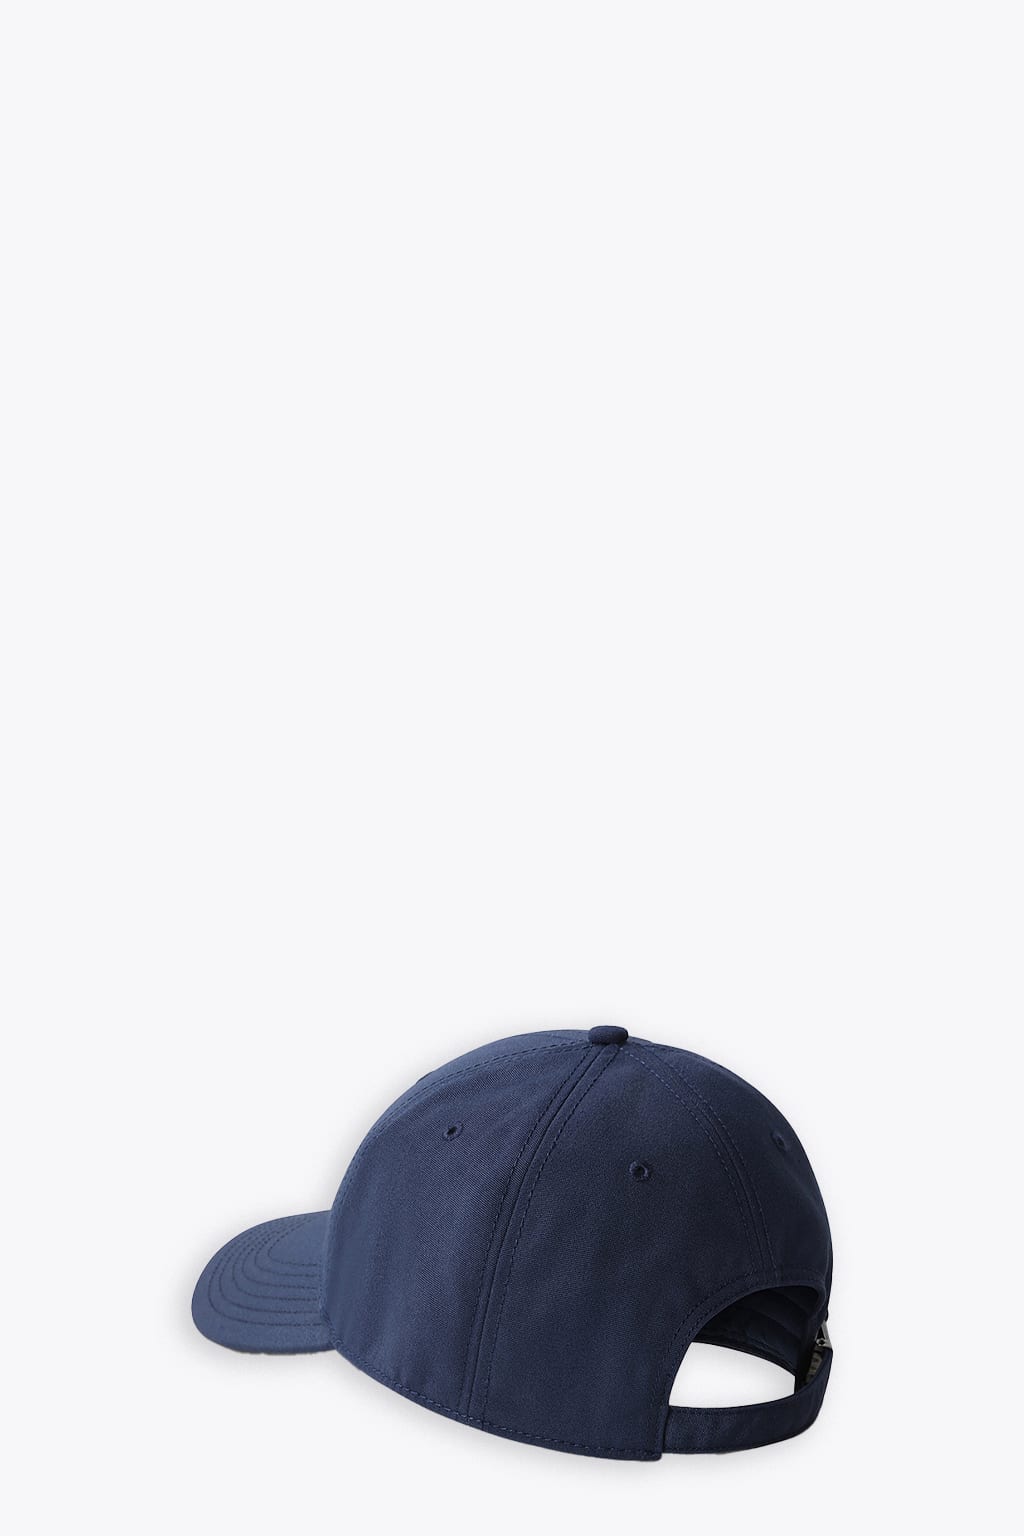 The North Face Recycled 66 Recycled 66 Hat Logo Embroidery - Cap Closet With Hat Classic Classic Smart Blue 